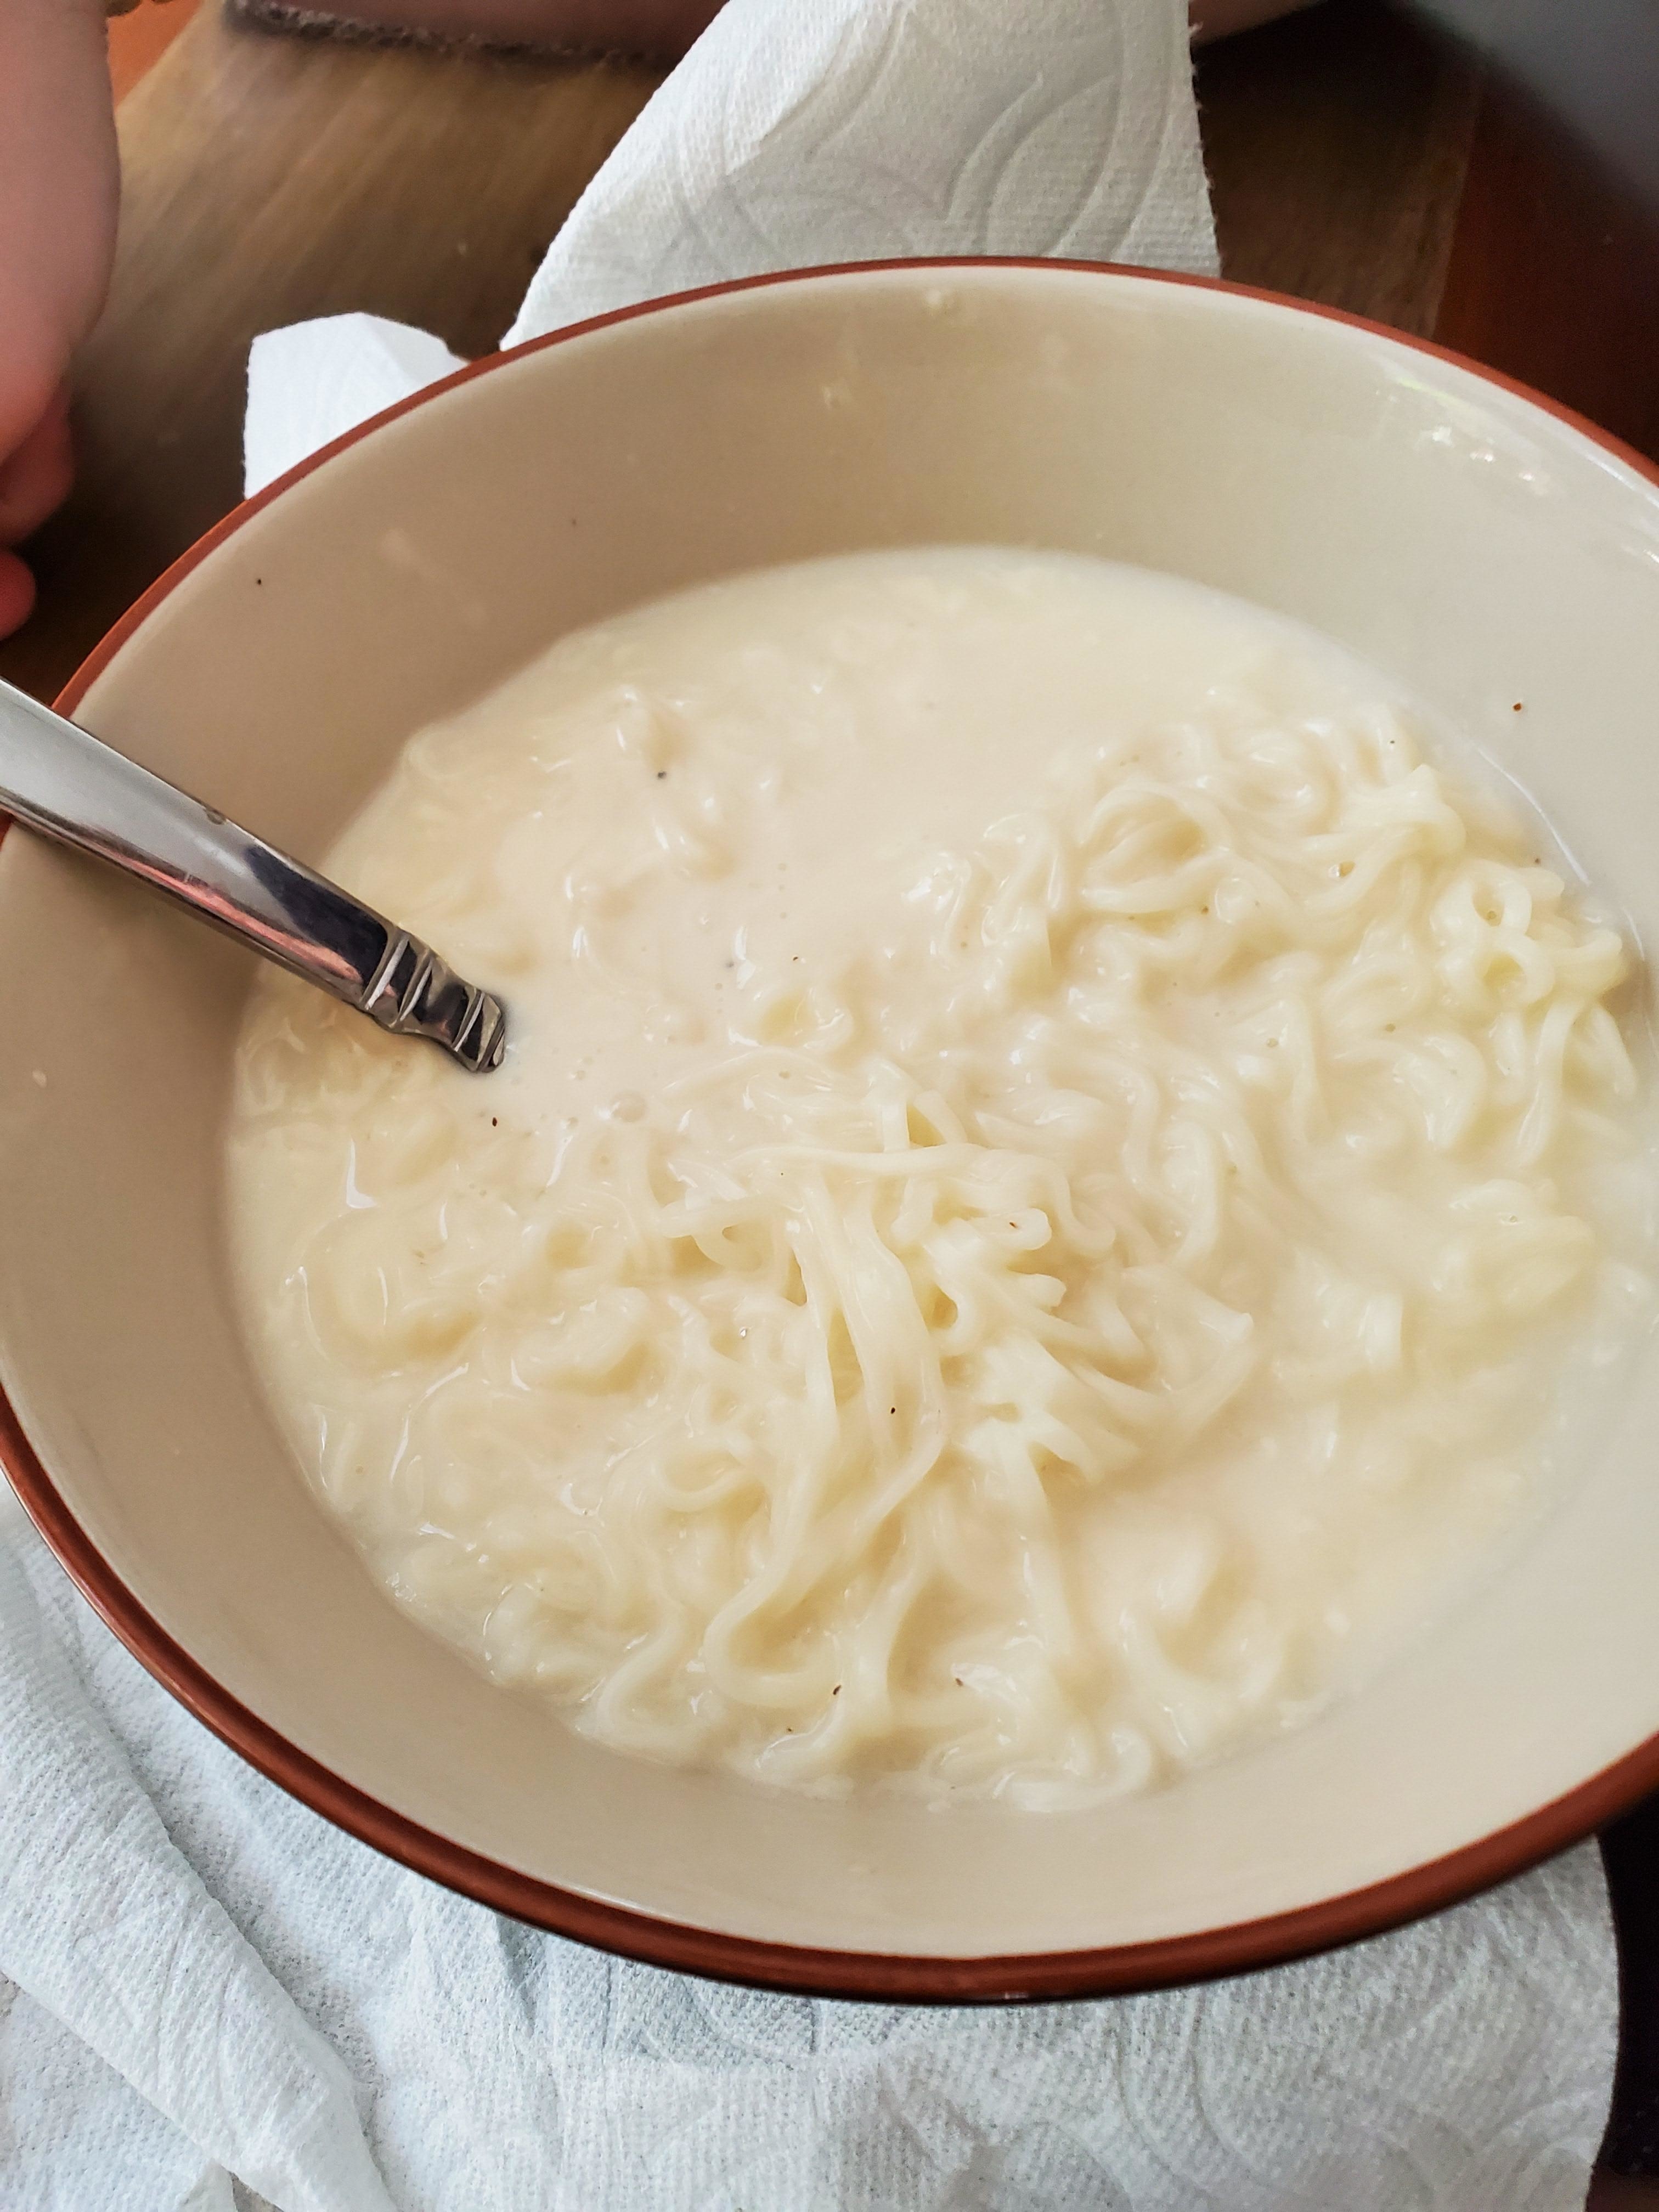 a bowl of ramen noodles in watery looking creamy soup